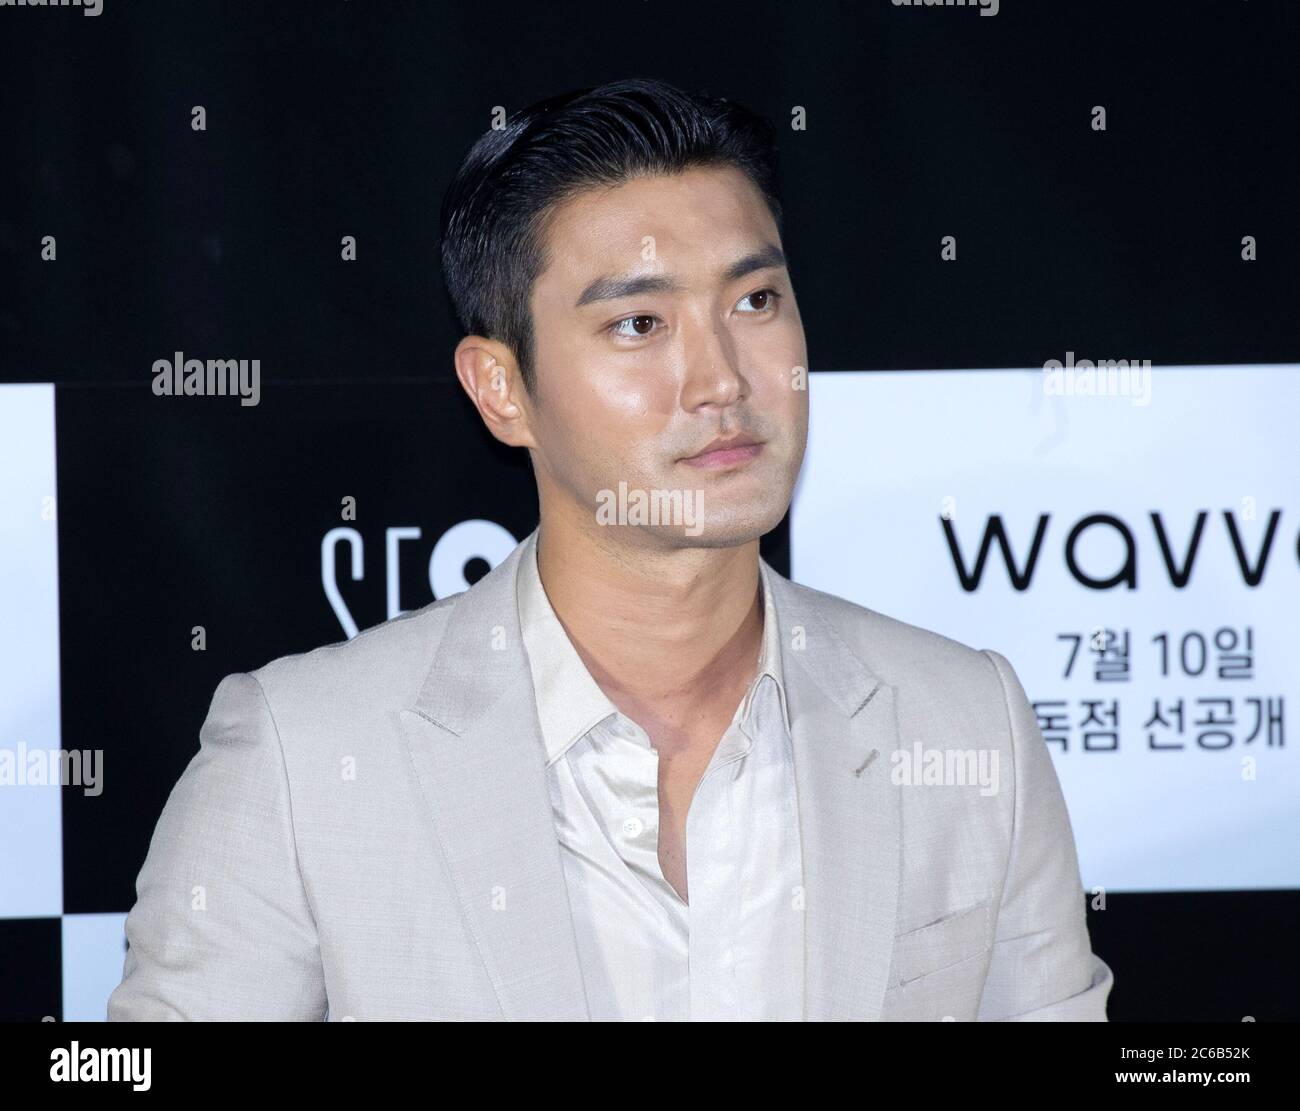 Seoul, South Korea. 8th July, 2020. South Korean actor and singer Choi Si-Won (stage name: Siwon) member of South Korean boy band Super Junior attends the press conference for film 'SF8' at CGV Cinema in Seoul, South Korea on July 8, 2020. The film will be open on July 10 through the OTT platform Wavve. (Photo by Lee Young-ho/Sipa USA) Credit: Sipa USA/Alamy Live News Stock Photo